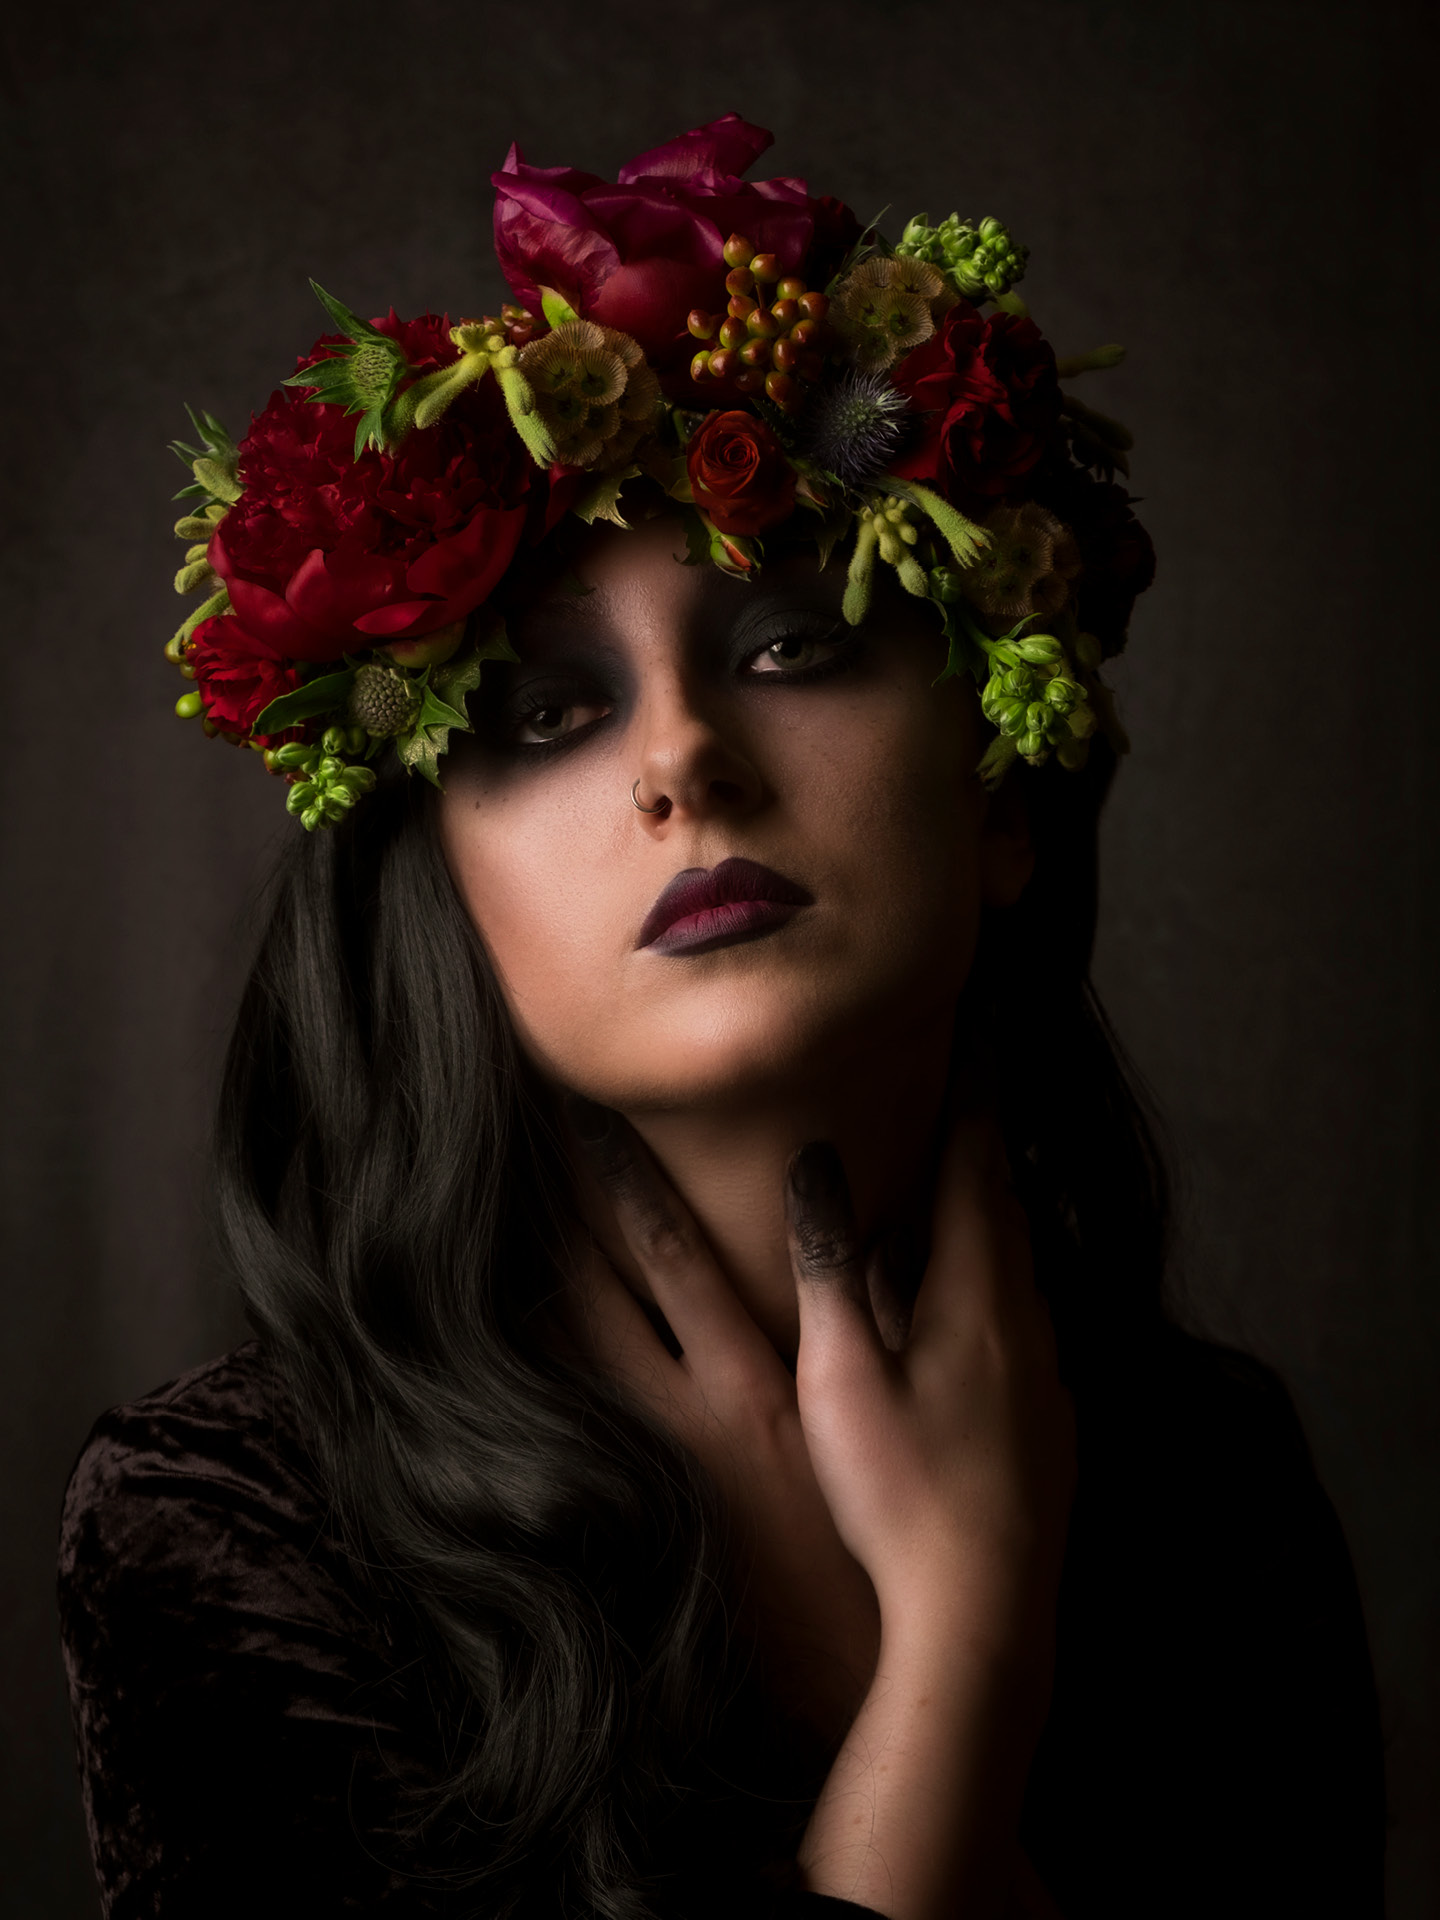 Portrait photography of model Bethan Perkins drawing particular attention to the floral head crown and deep black of the make-up on the finger tips